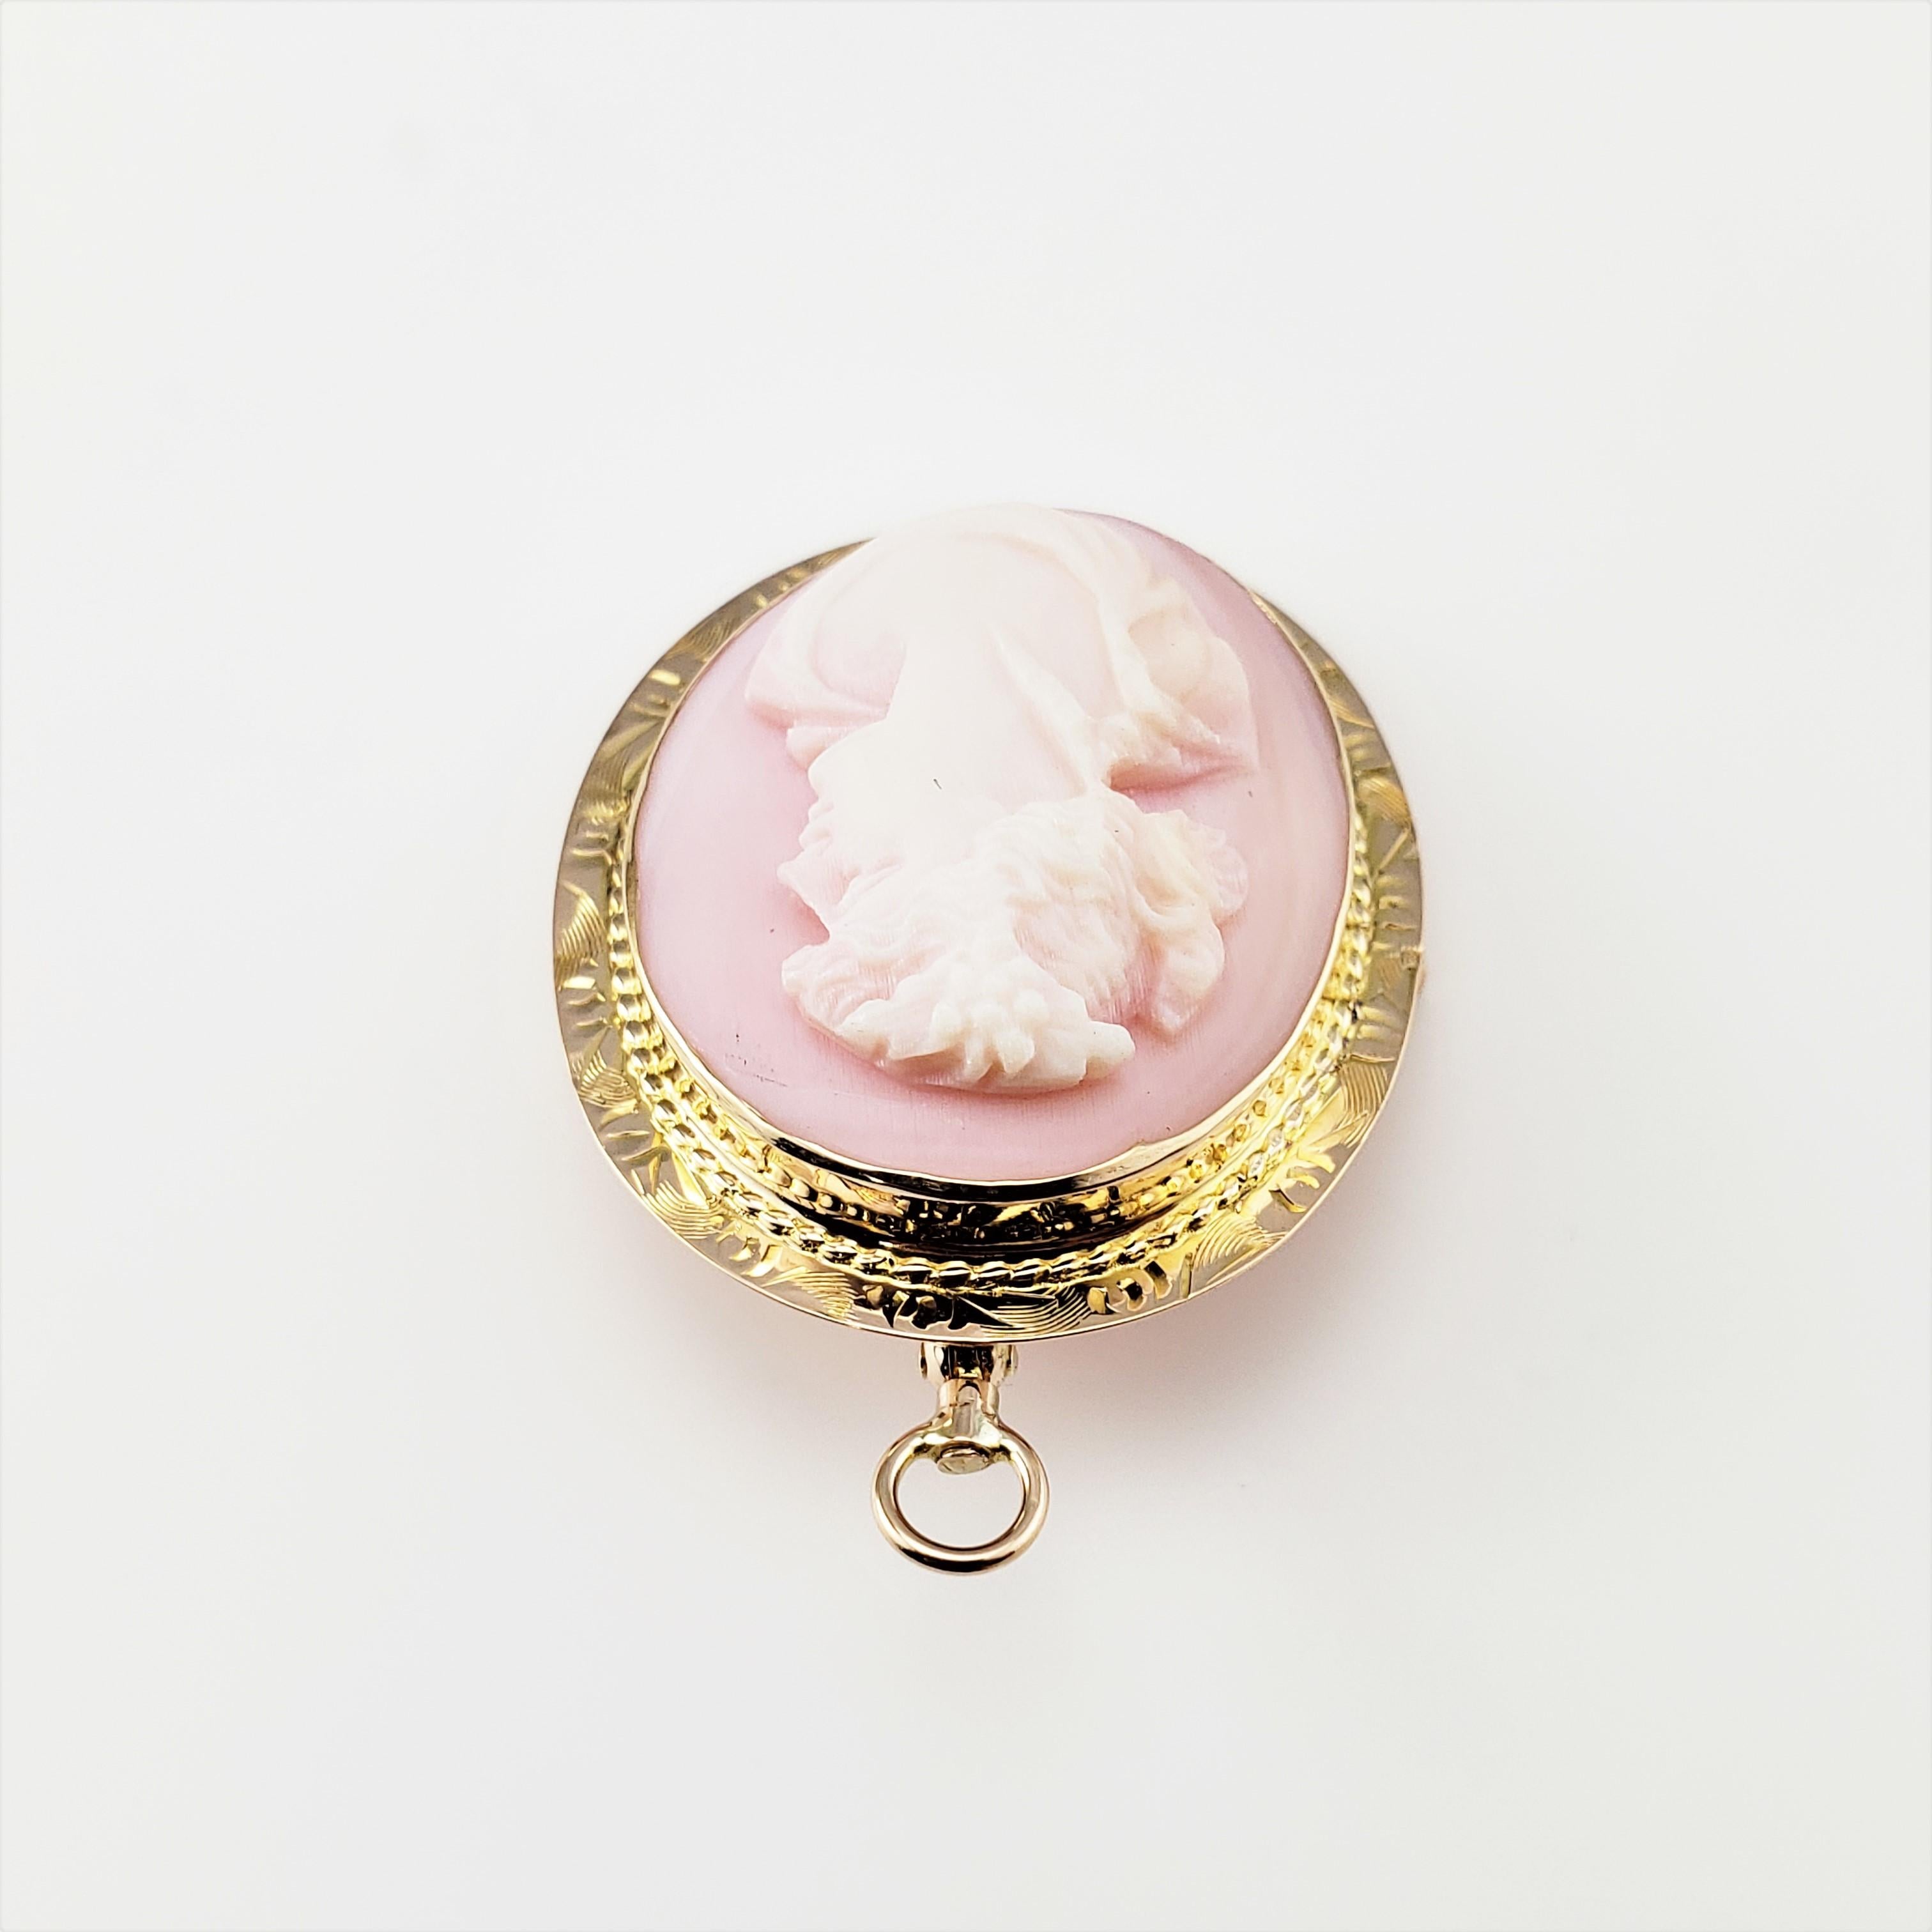 Vintage 10 Karat Yellow Gold Pink  Cameo Pendant/Brooch-

This elegant pink cameo features a lovely lady in profile framed in beautifully detailed 10K yellow gold.  Can be worn as a brooch or a pendant.

*Chain not included

Size:  31 mm x  25